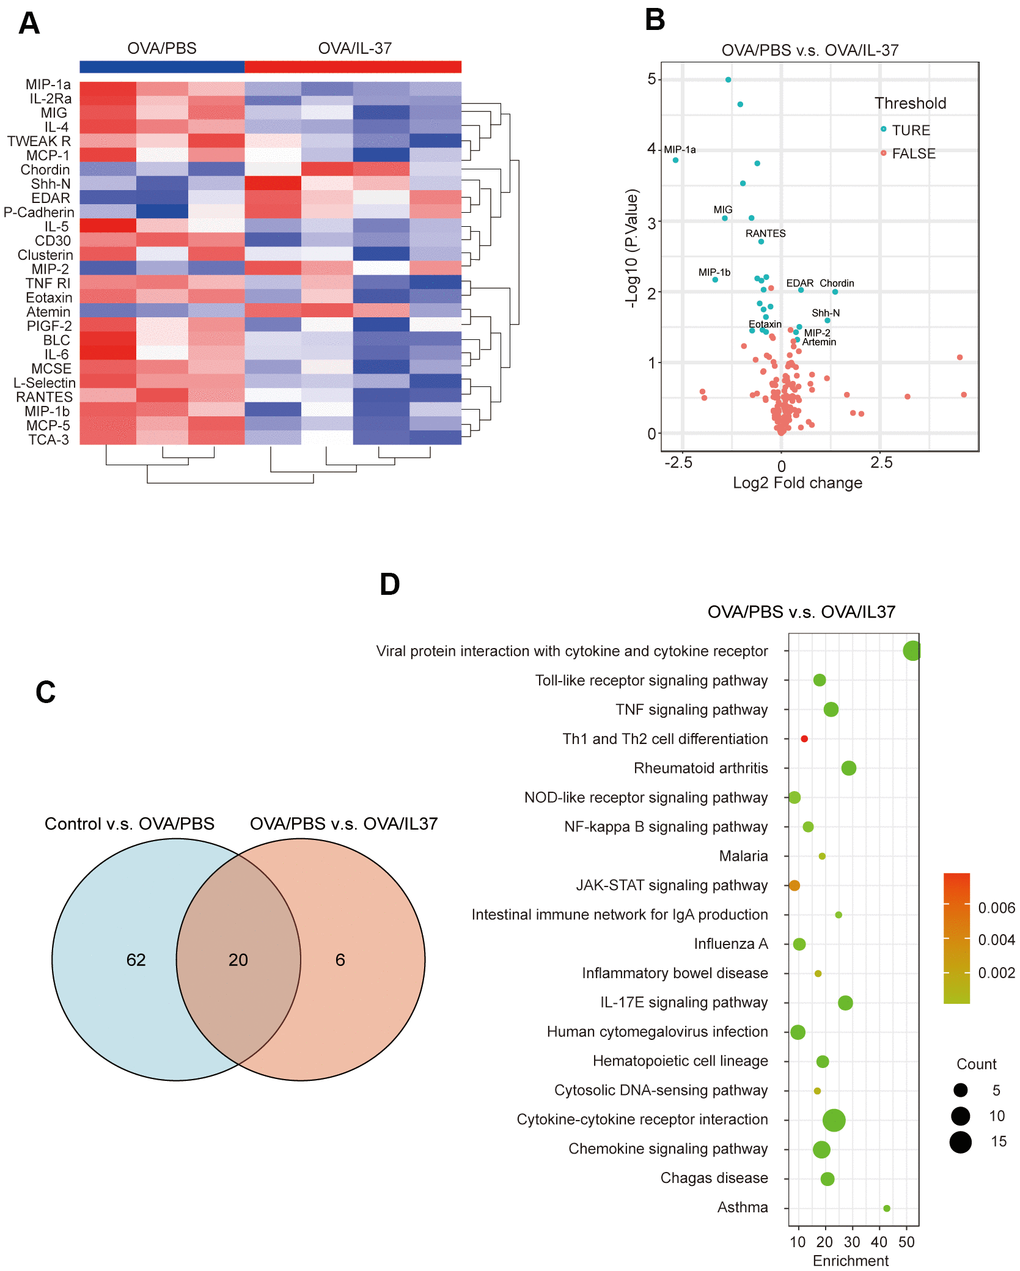 Visualization of cytokine antibody array analysis. (A) Clustering heatmap. Red represents OVA/IL-37 group, blue represents OVA/PBS group. (B) Volcano plot shows 26 differentially expressed proteins (DEPs)(blue dot) between OVA/PBS and OVA/IL-37, which are defined as those with adjust p value(adj.P.Val) less than 0.05 and foldchange over 1.2 or less than 0.83(absolute LogFC>0.263). Top 10 DEPs have been marked on the picture. (C) There are 20 DEPs result from intersection of Control v.s. OVA/PBS and OVA/PBS v.s. OVA/IL-37. (D) Protein function annotation KEGG pathway (OVA/PBS v.s. OVA/IL-37).